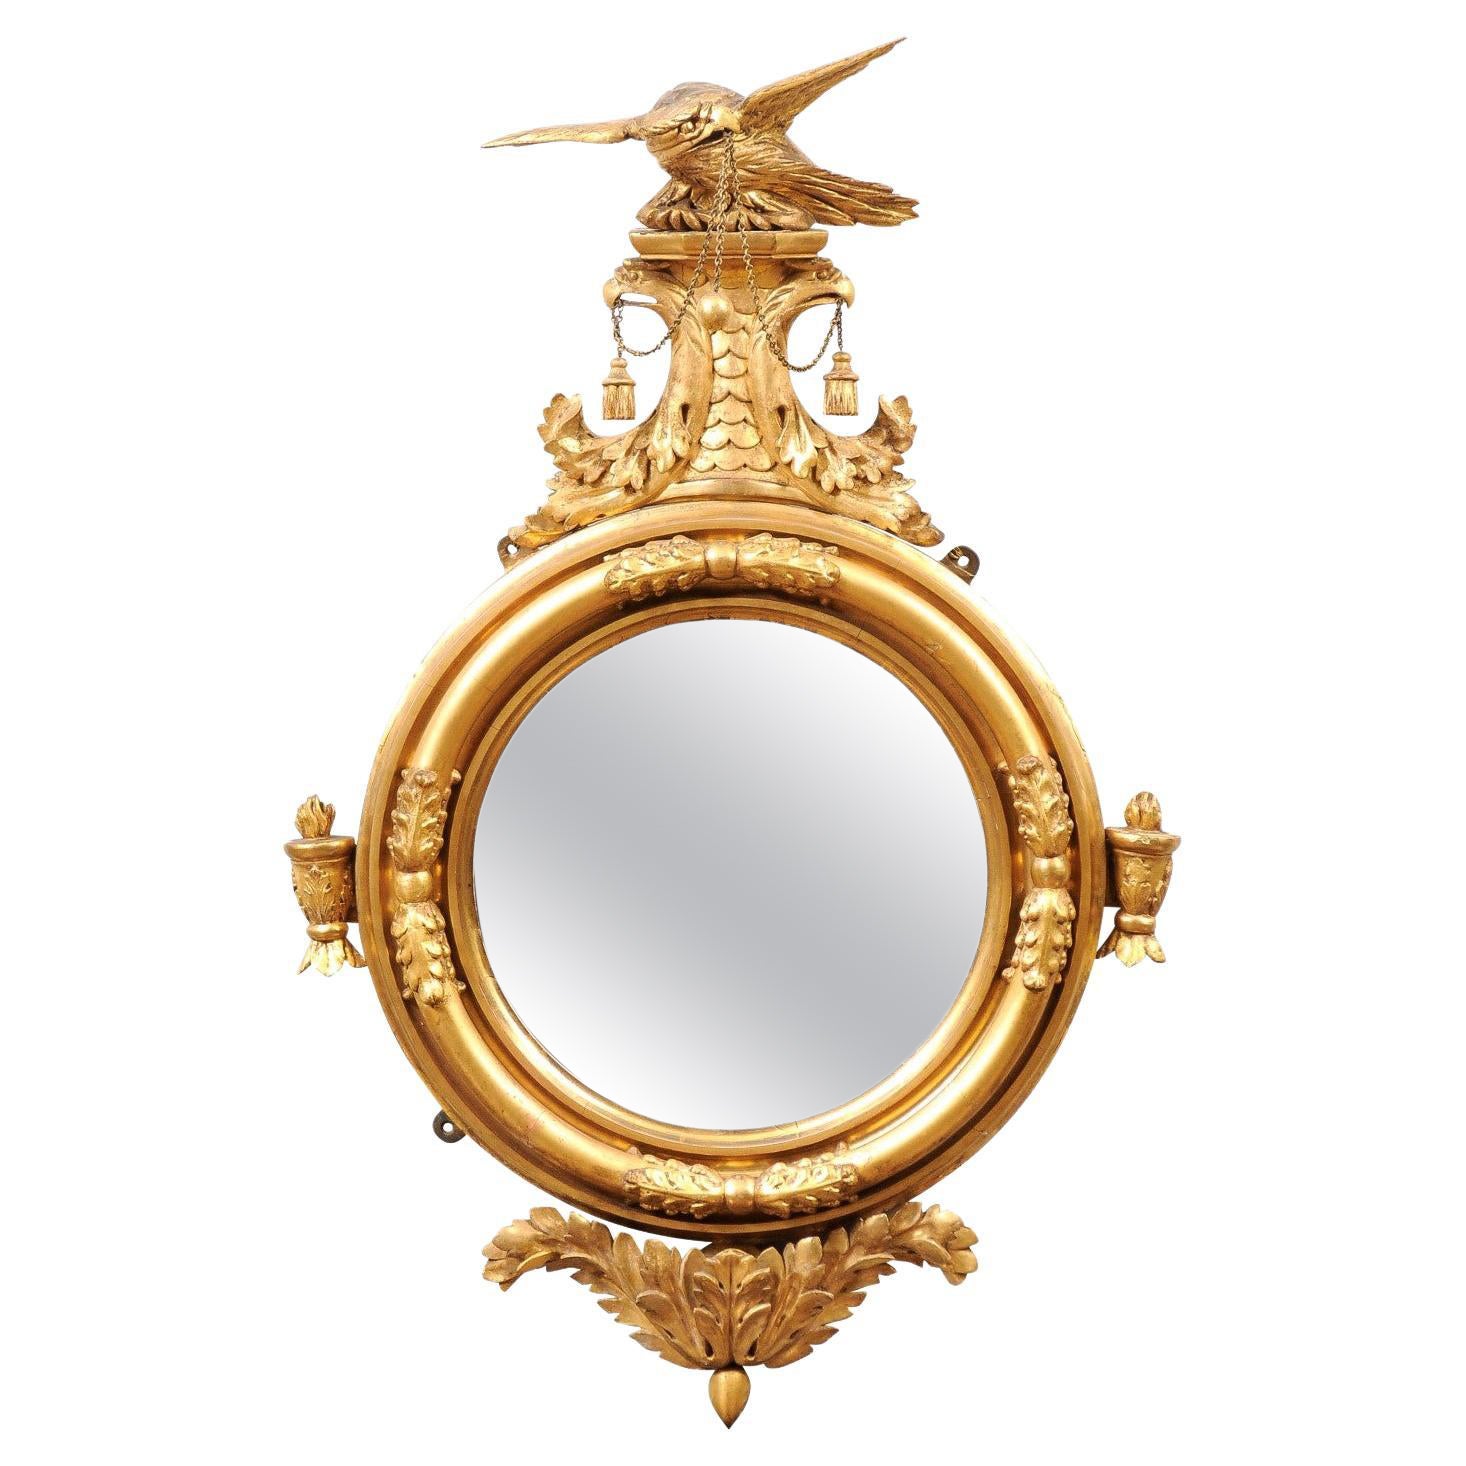 English Regency 19th Century Bull’s Eye Mirror with Eagle Crest  For Sale